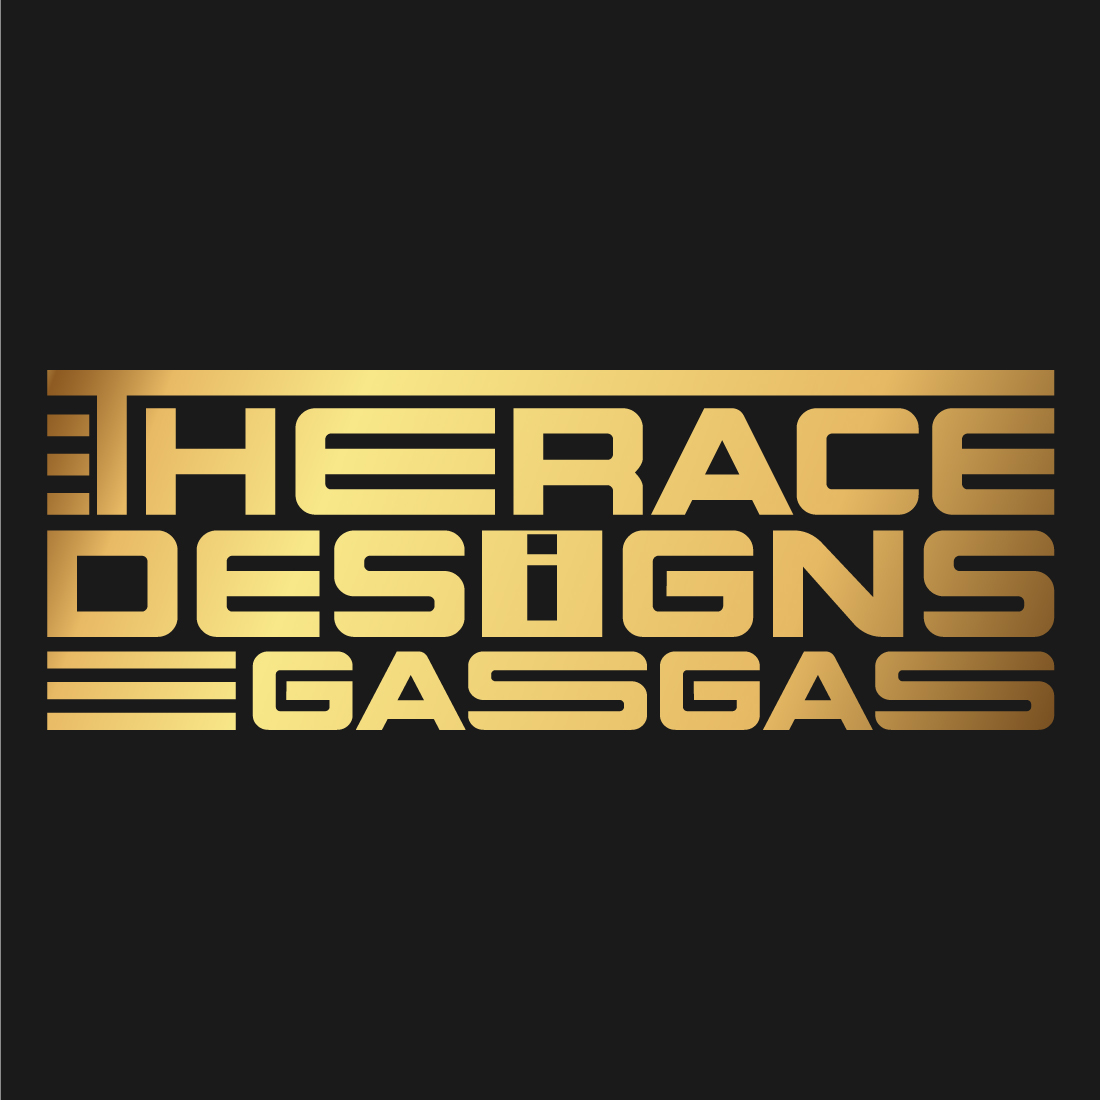 Image with irresistible inscription for prints Therace designs gasgas.